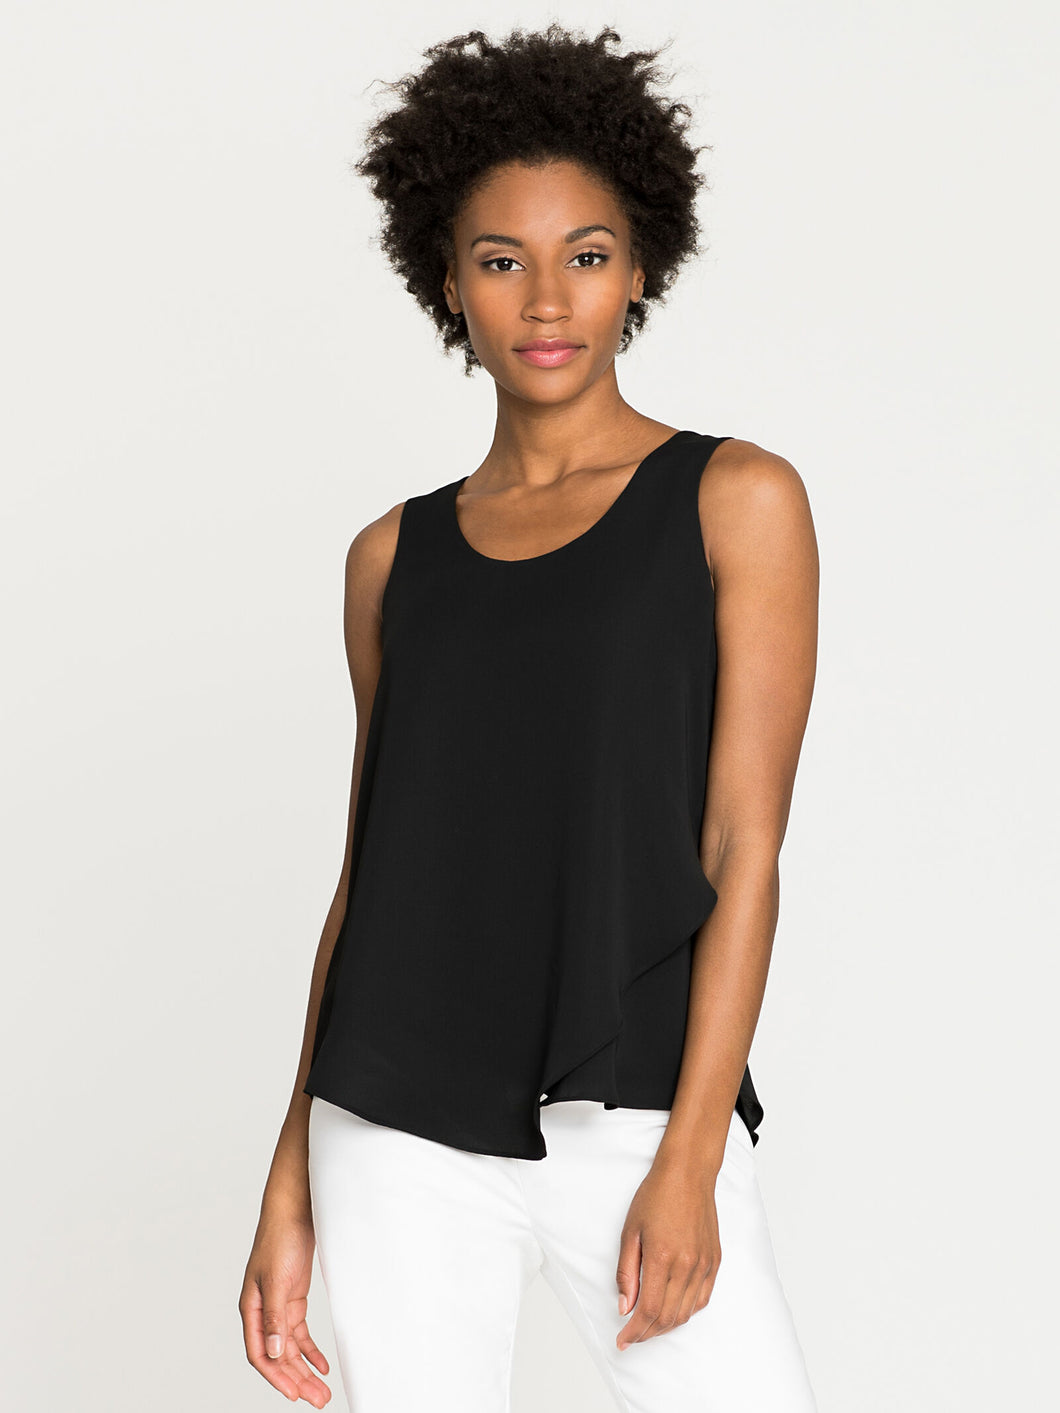 Promenade Top in Black by Nic and Zoe